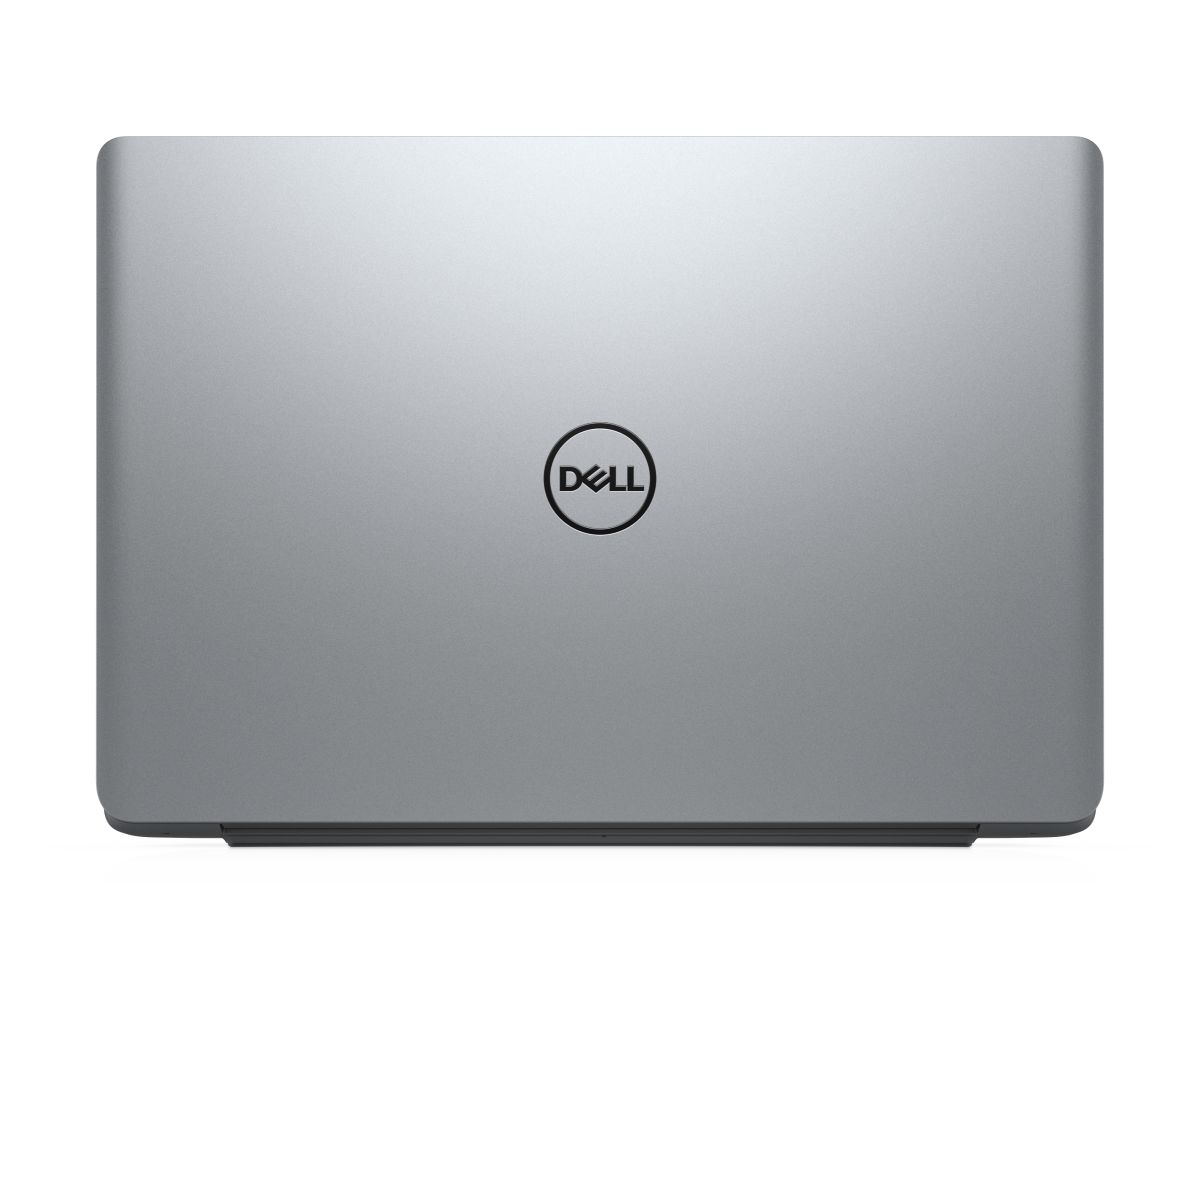 DELL Vostro 5581 - 5581-3598 laptop specifications